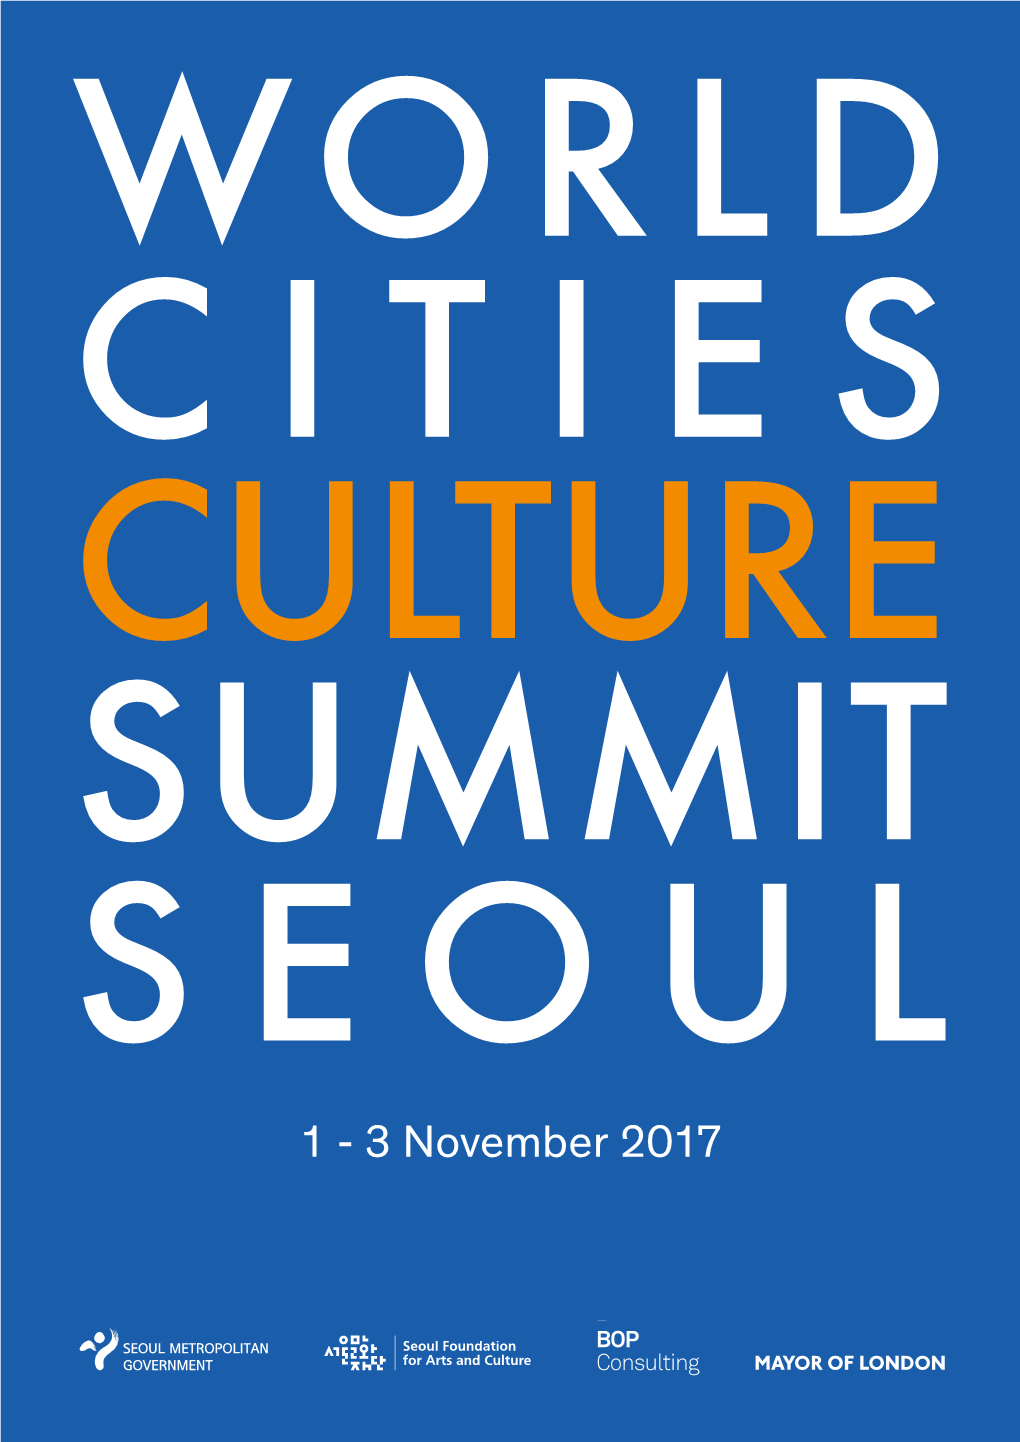 1 - 3 November 2017 Beyond the Creative City: New Civic Agendas for Citizens and by Citizens Policy Brieﬁng 6: Seoul Summit 2017 Contents